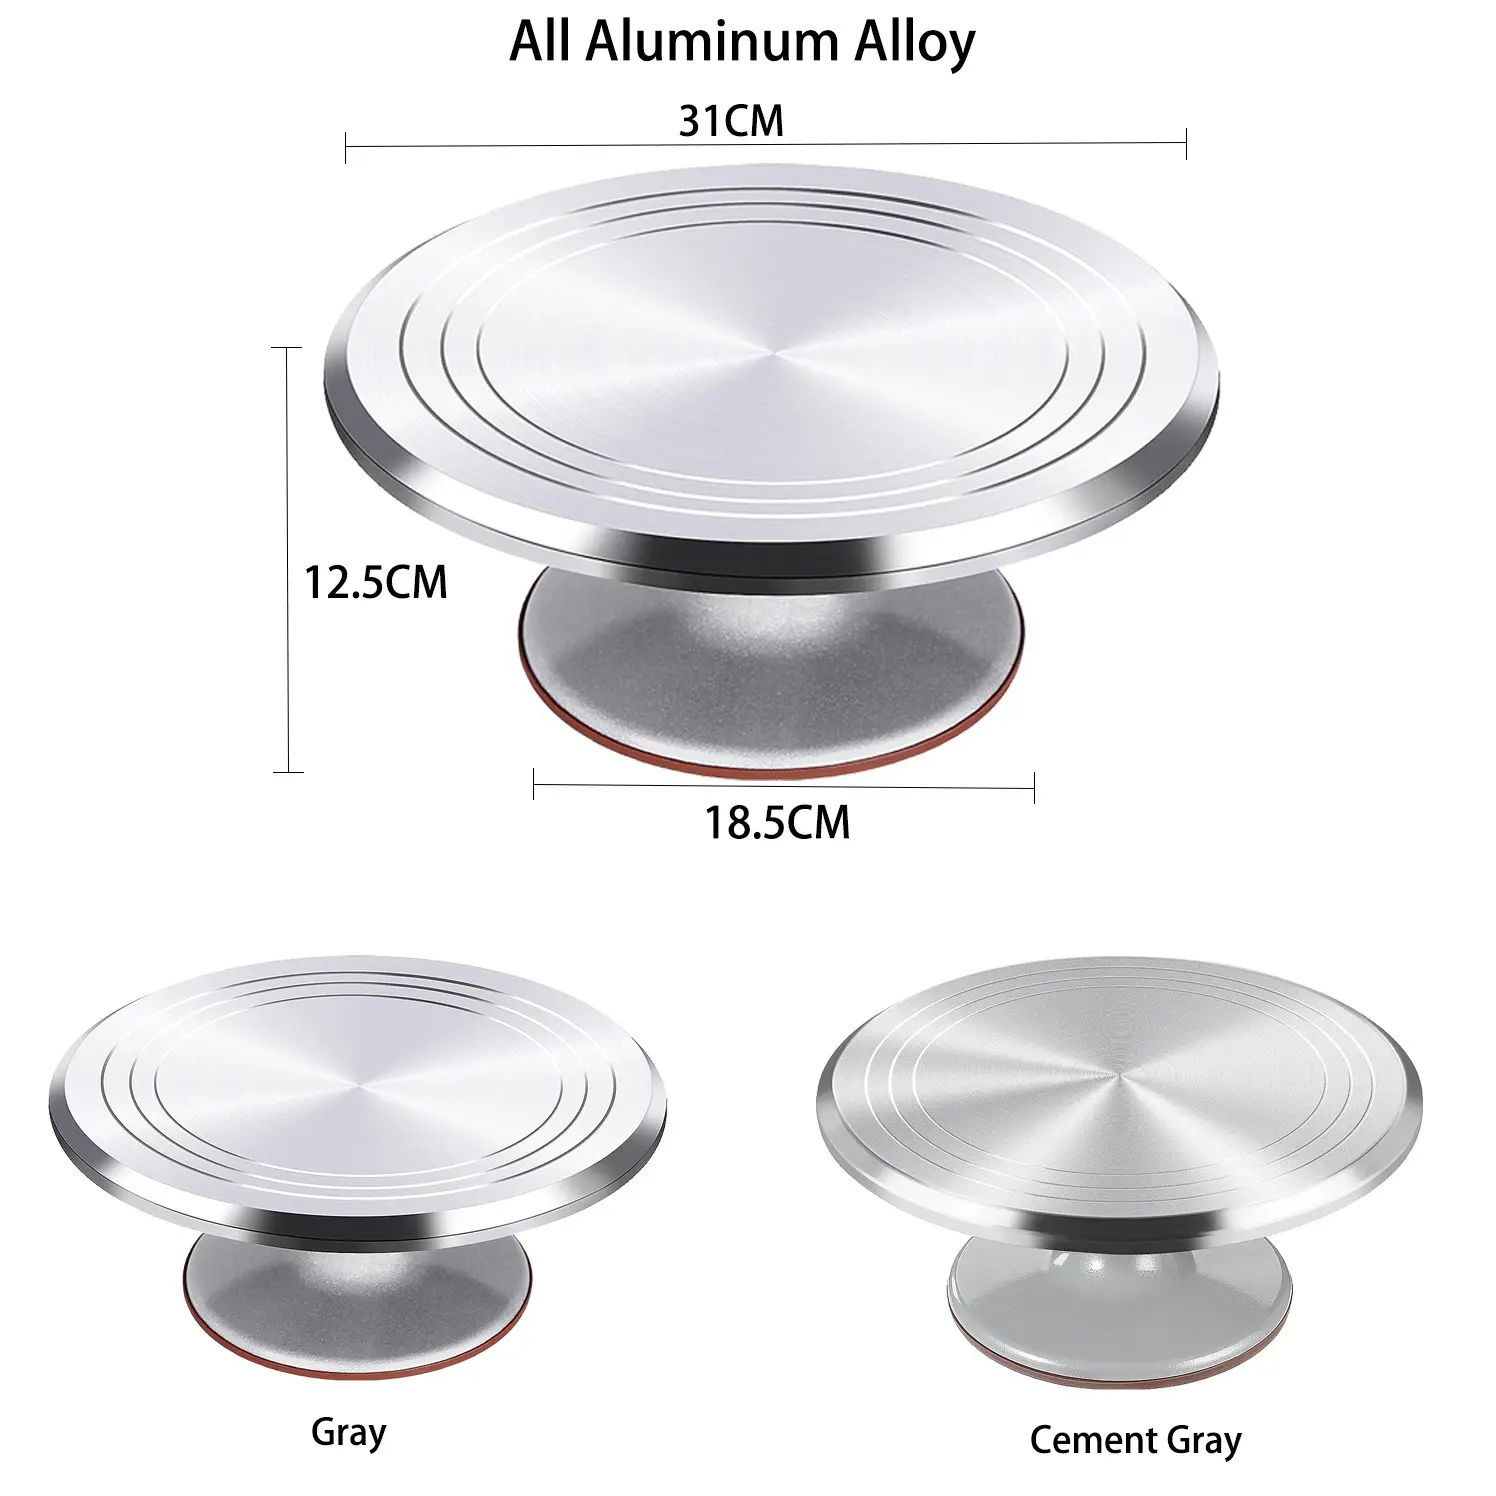 Cake Tools Turntable Cake Stand 12 Inch Kitchen Metal Baking Aluminium Alloy Cake Turntable